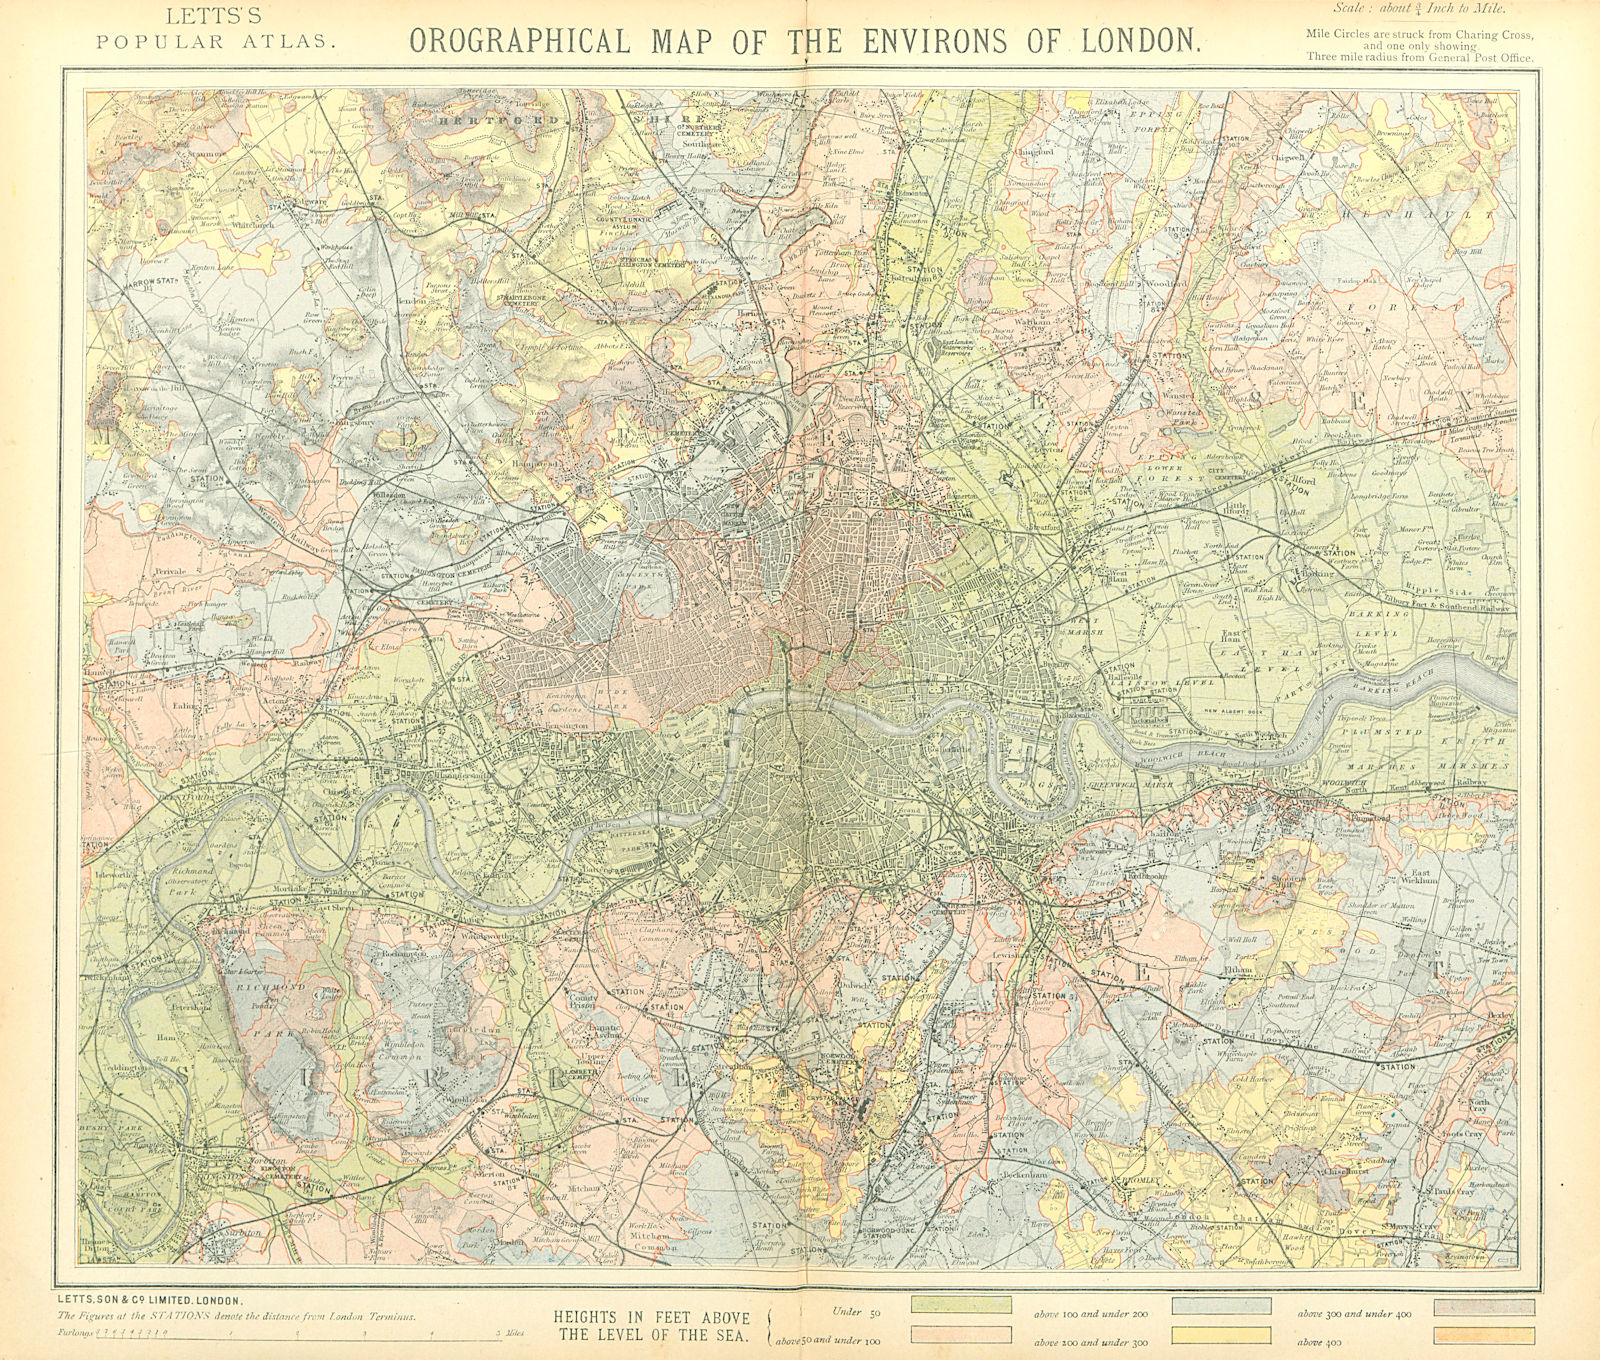 Associate Product Orographical map of the Environs of London. Relief elevation. LETTS 1883